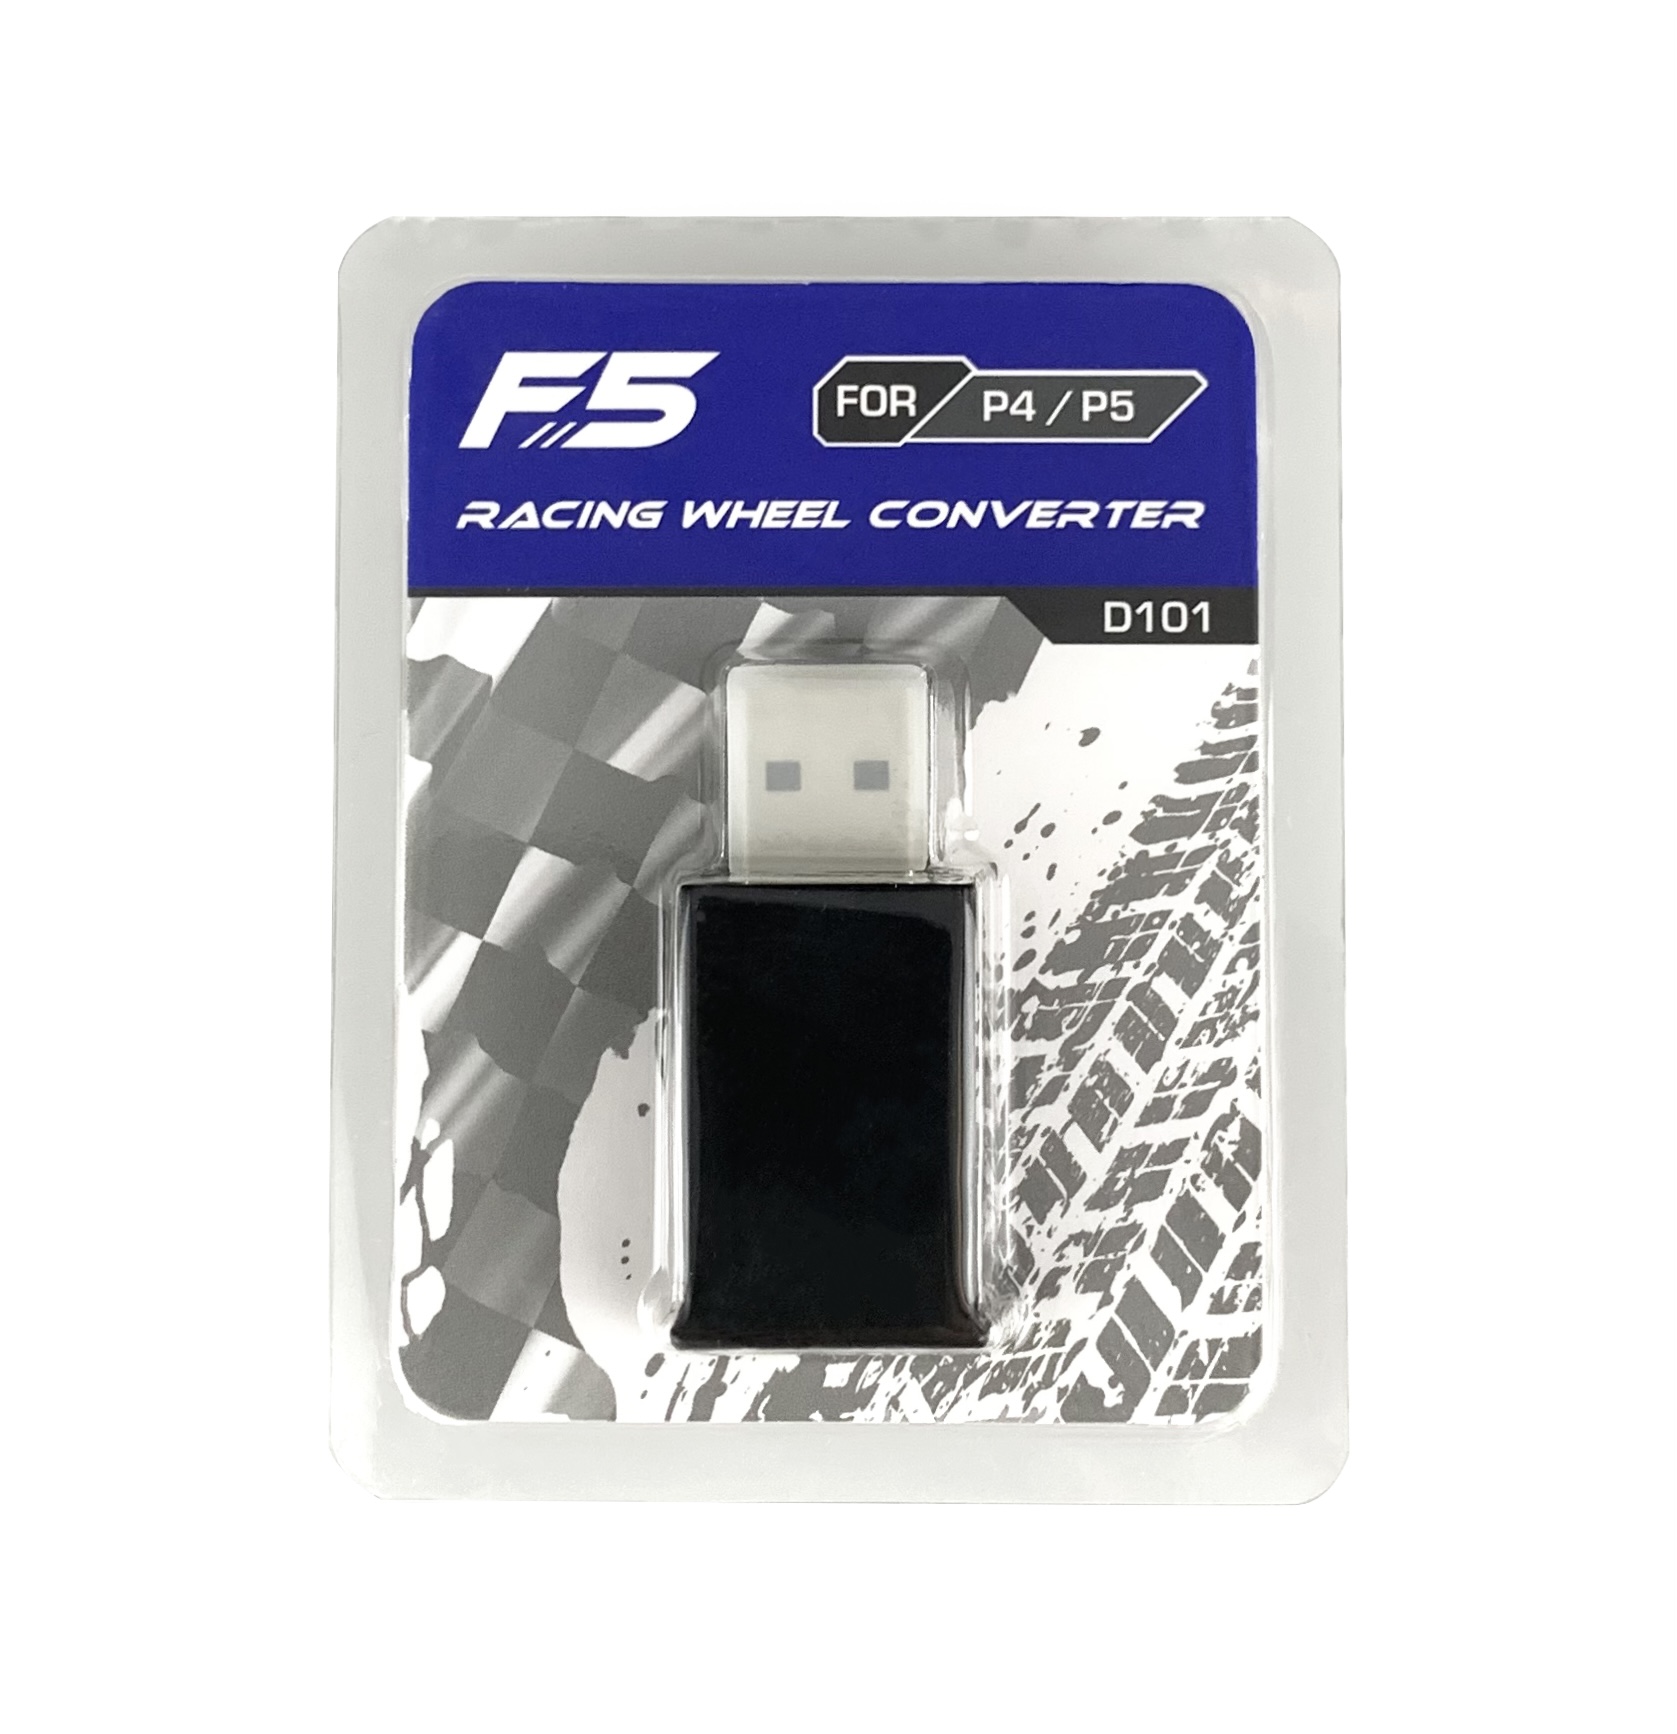 F5 Racing Wheel Converter For PS4/PS5